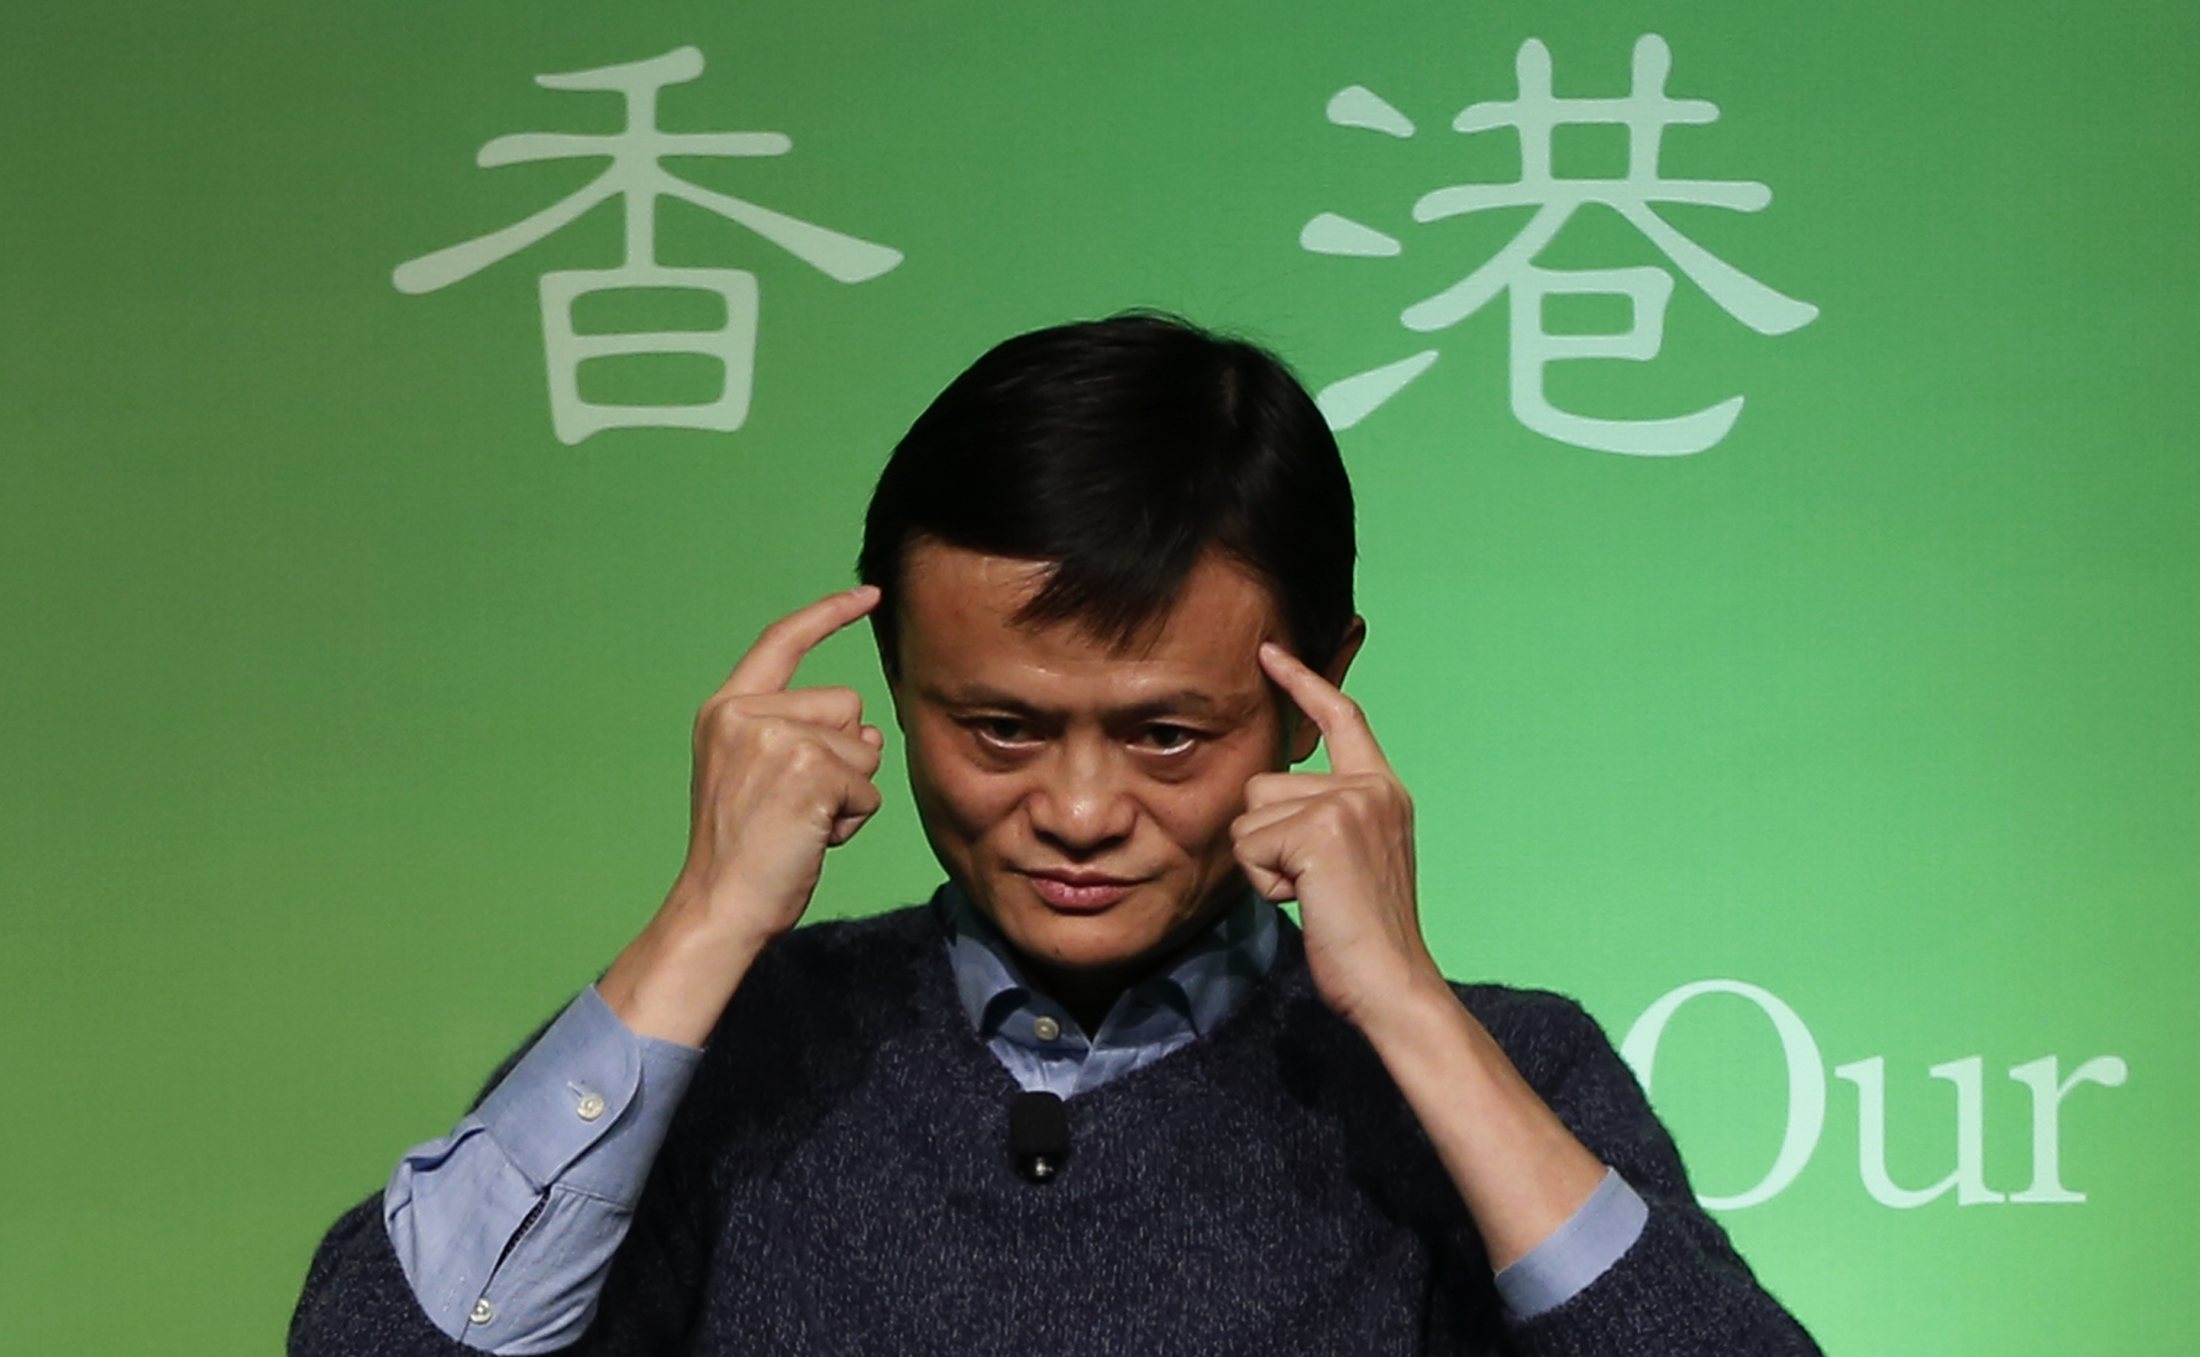 Entrepreneurship education can complement Jack Ma's HK$1 billion fund for Hong Kong youngsters. Photo: Reuters